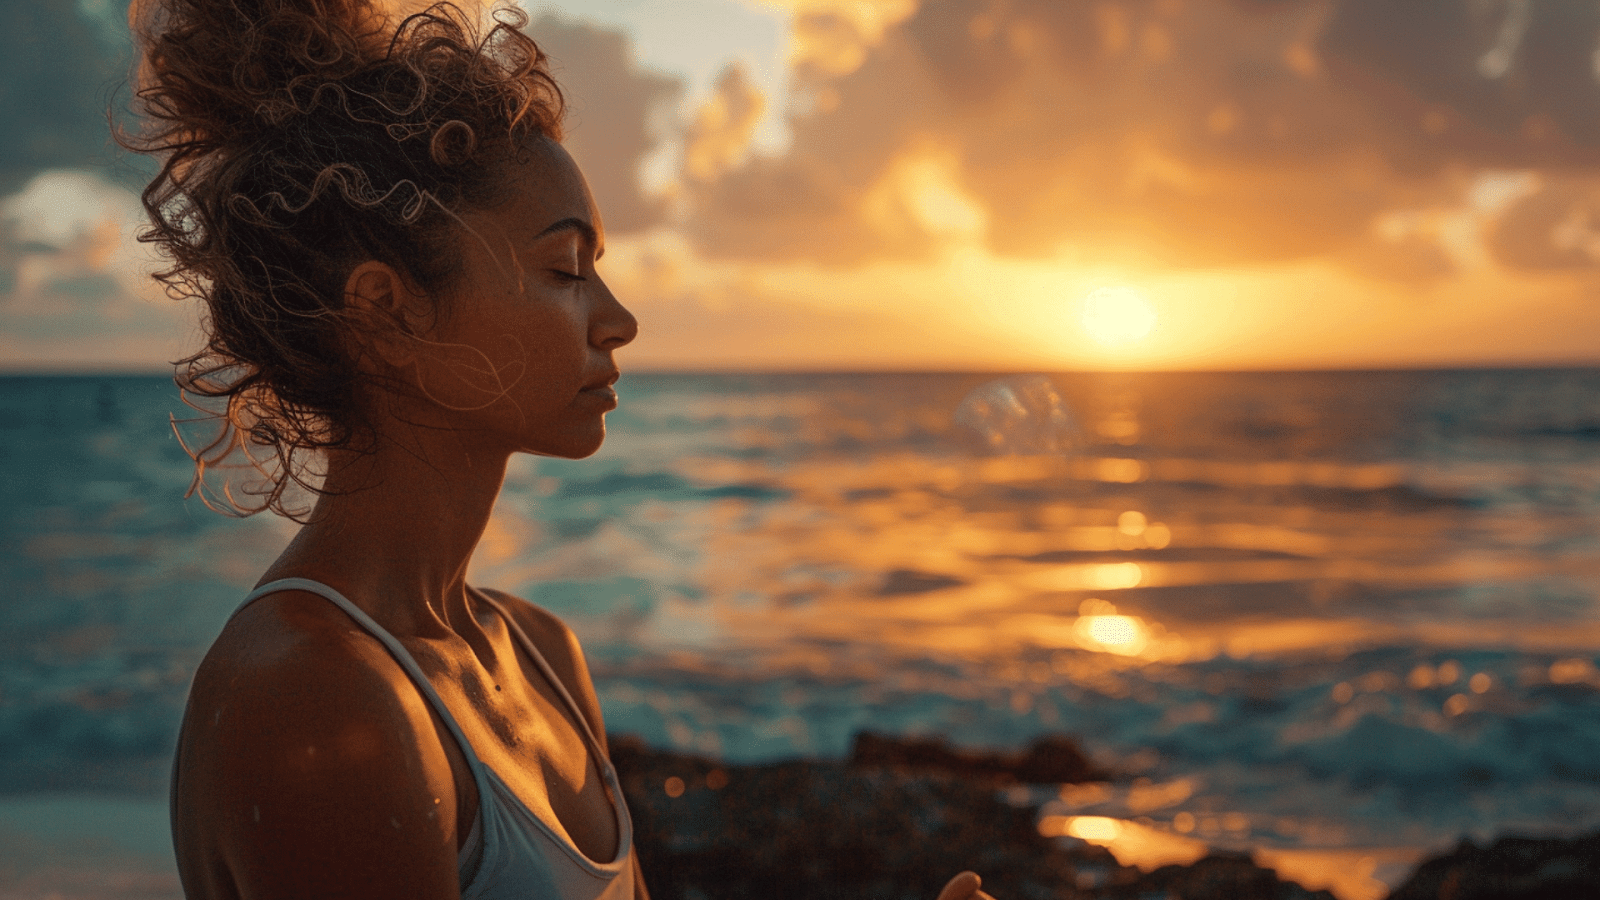 Woman meditating at sunrise on a Tulum beach, embodying the peace and safety of wellness experiences in this Mexican paradise